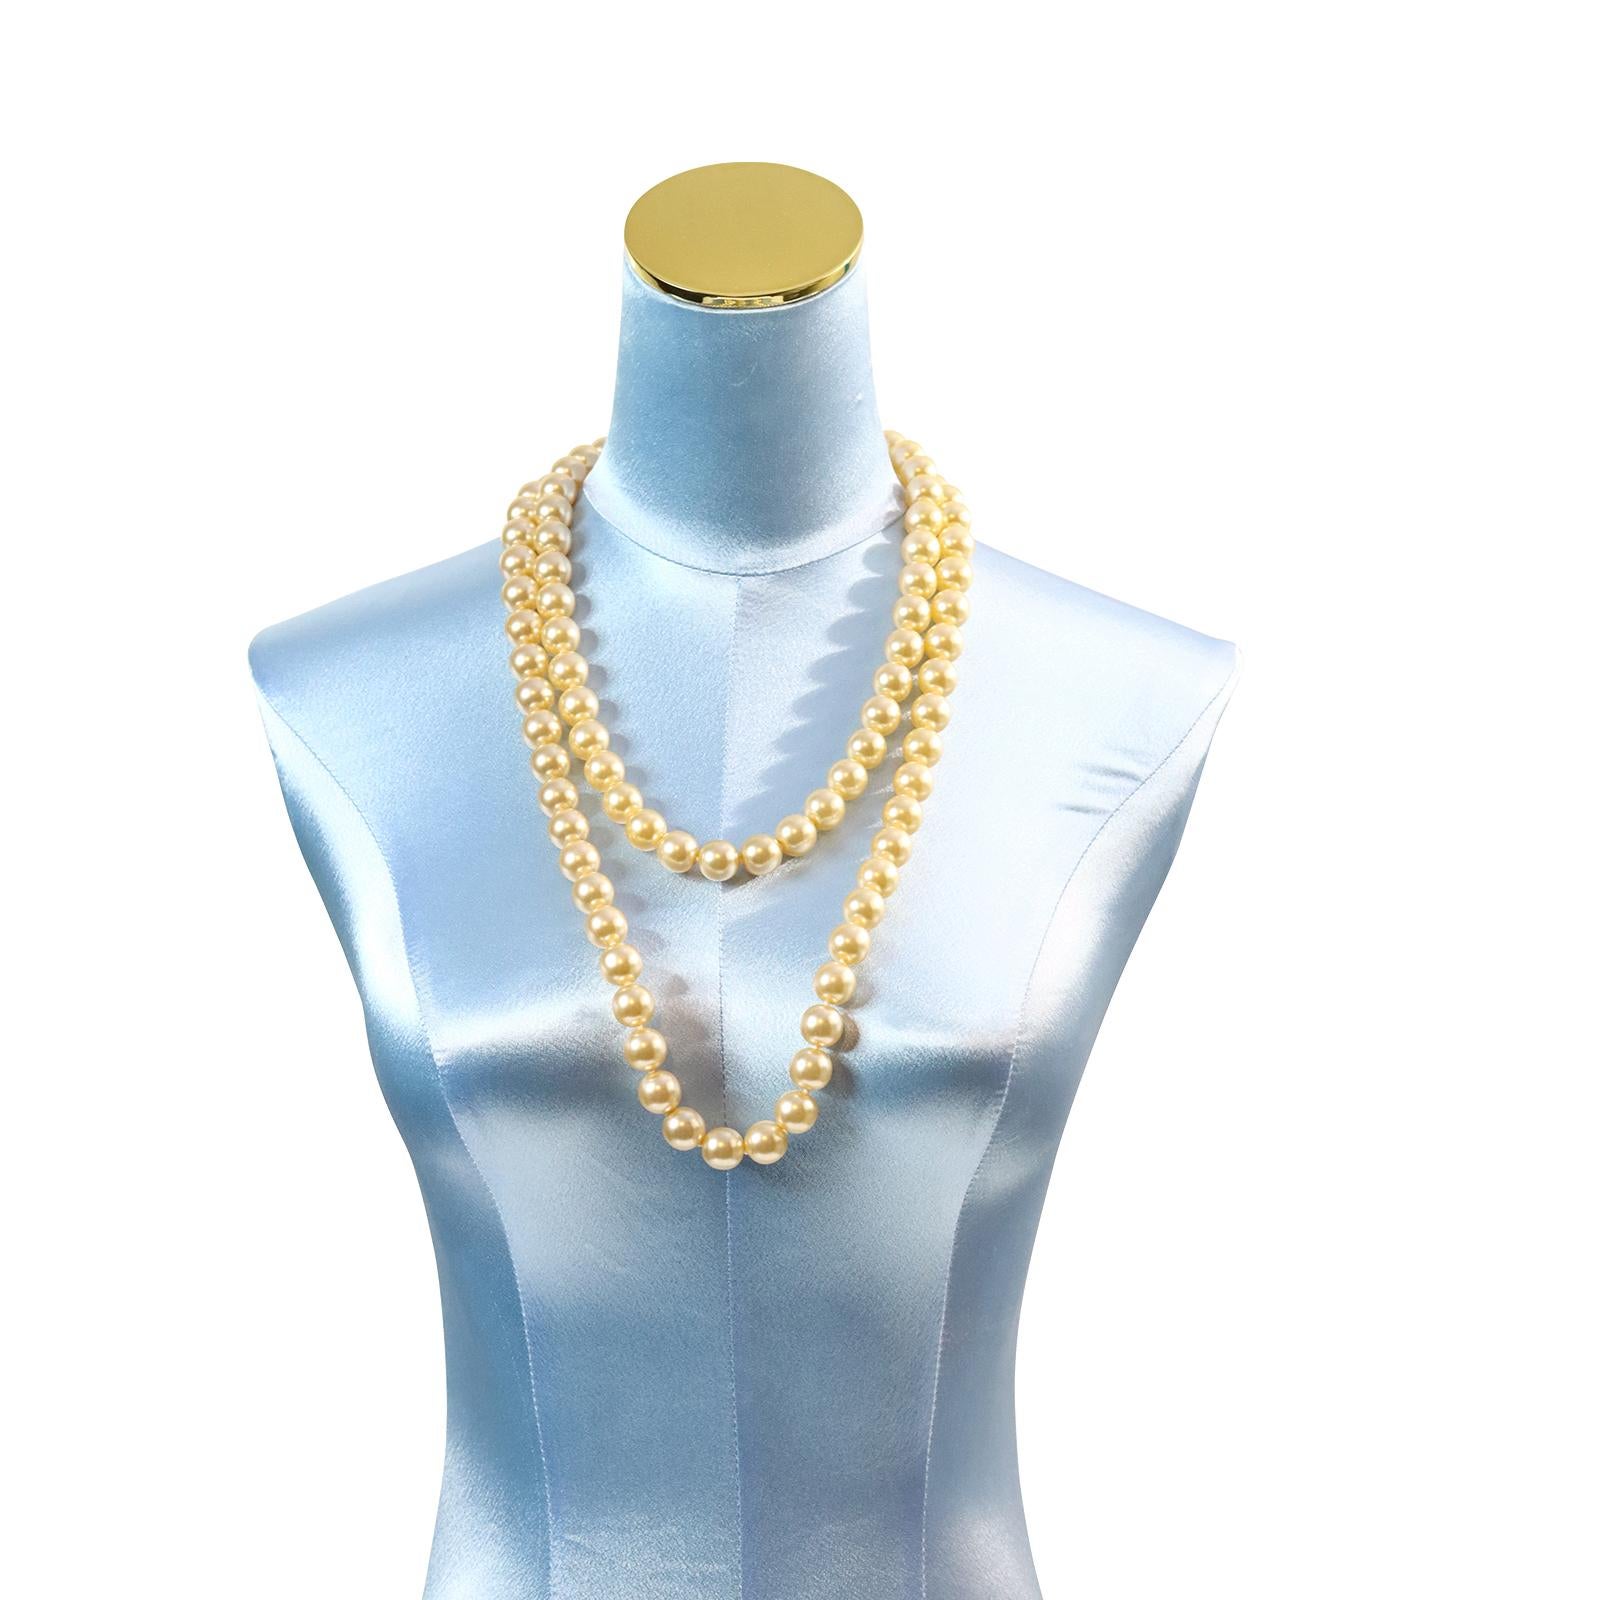 Vintage French Single Strand of Faux Pearls Necklace.  This is so lovely to wear alone and Plain or to do many things with. Wear a Brooch on it or Wrap it Double. A very beautiful French strand of pearls.